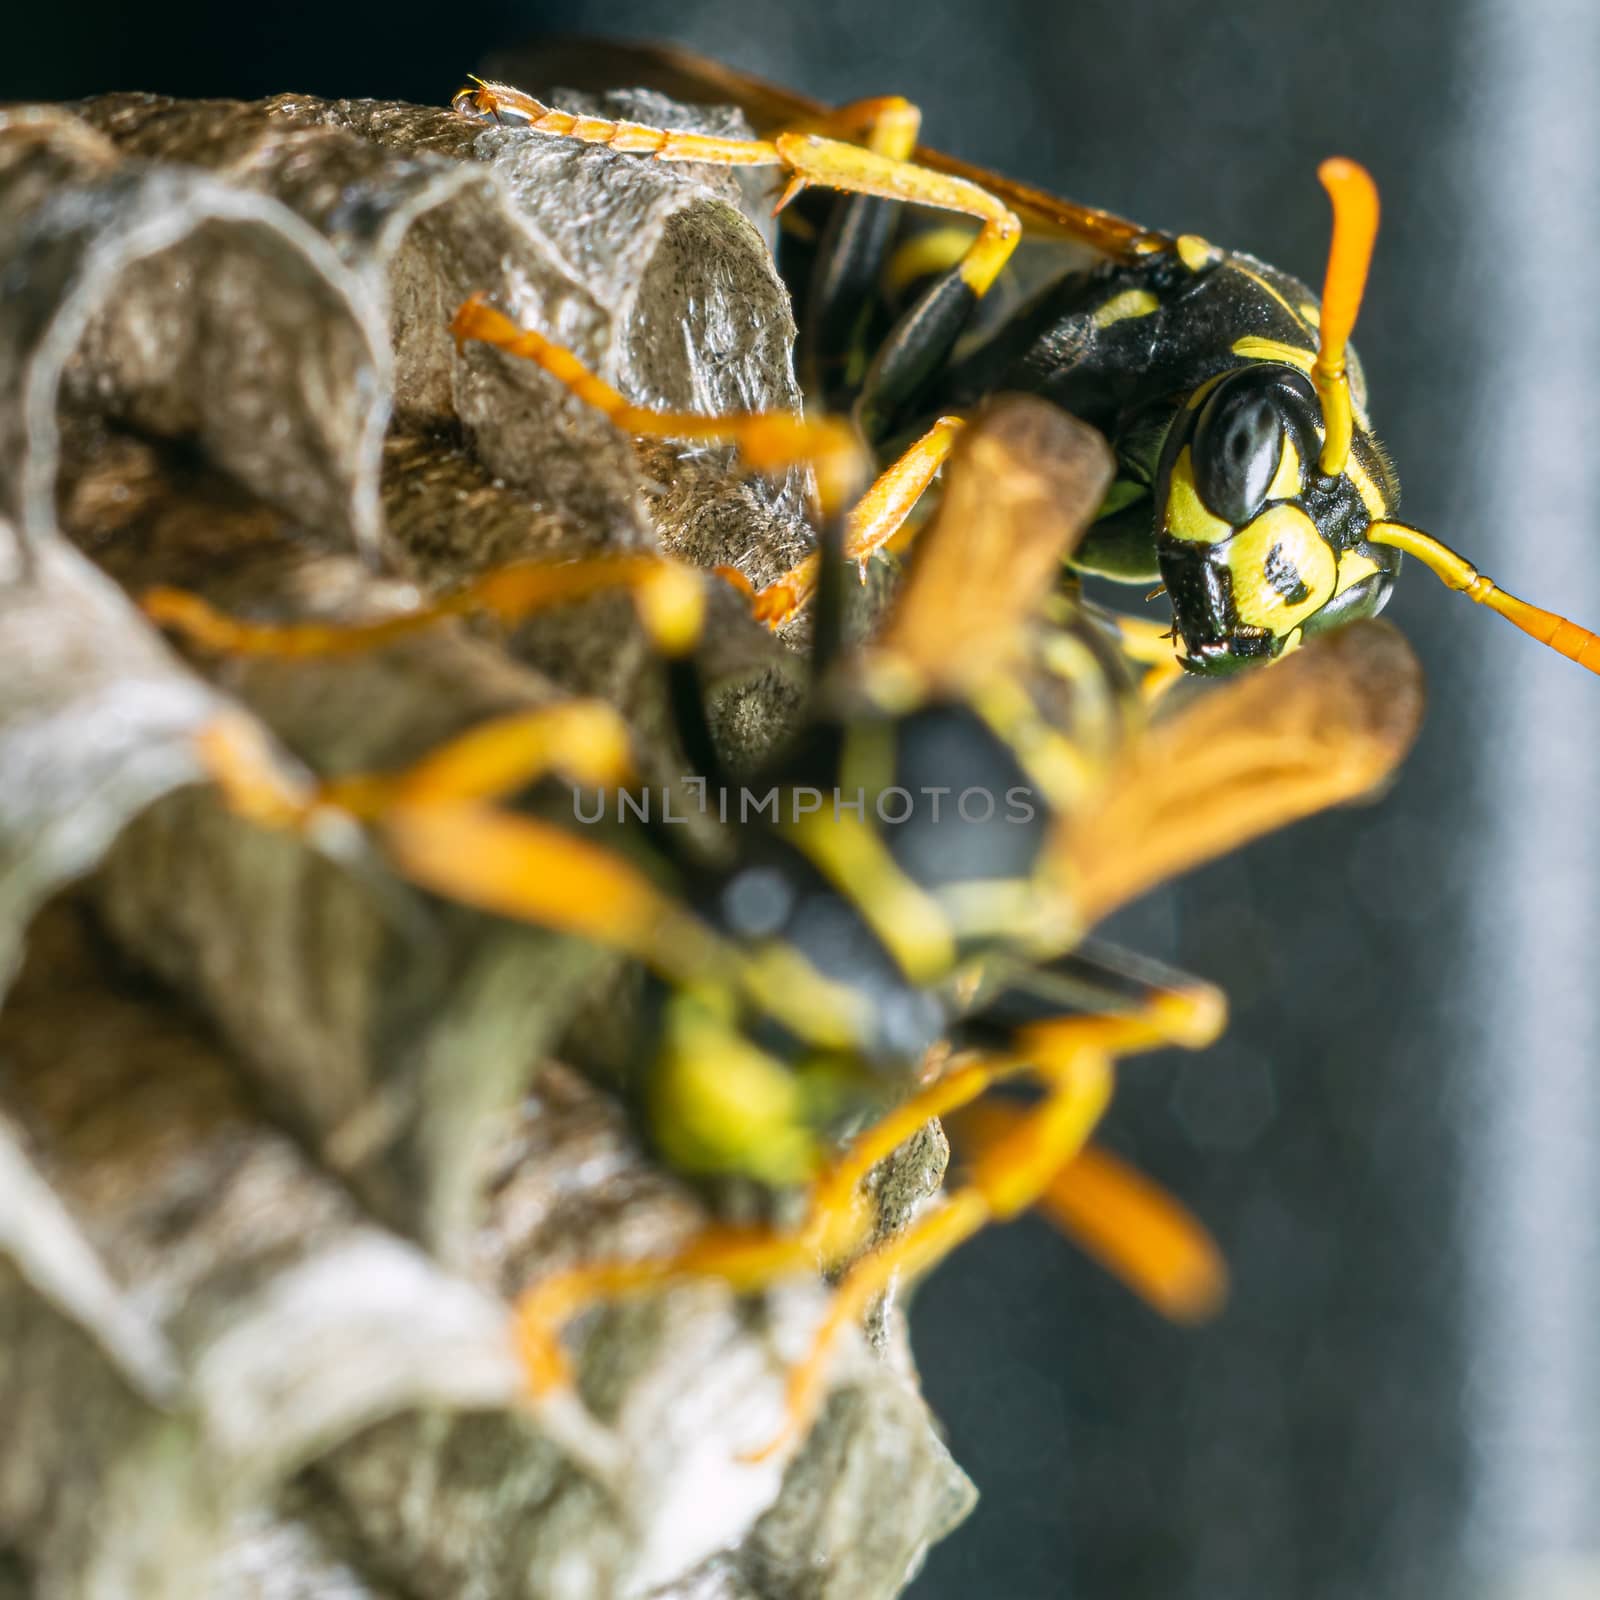 Macro closeup of a wasps' nest with the wasps sitting and protecting the nest by Umtsga